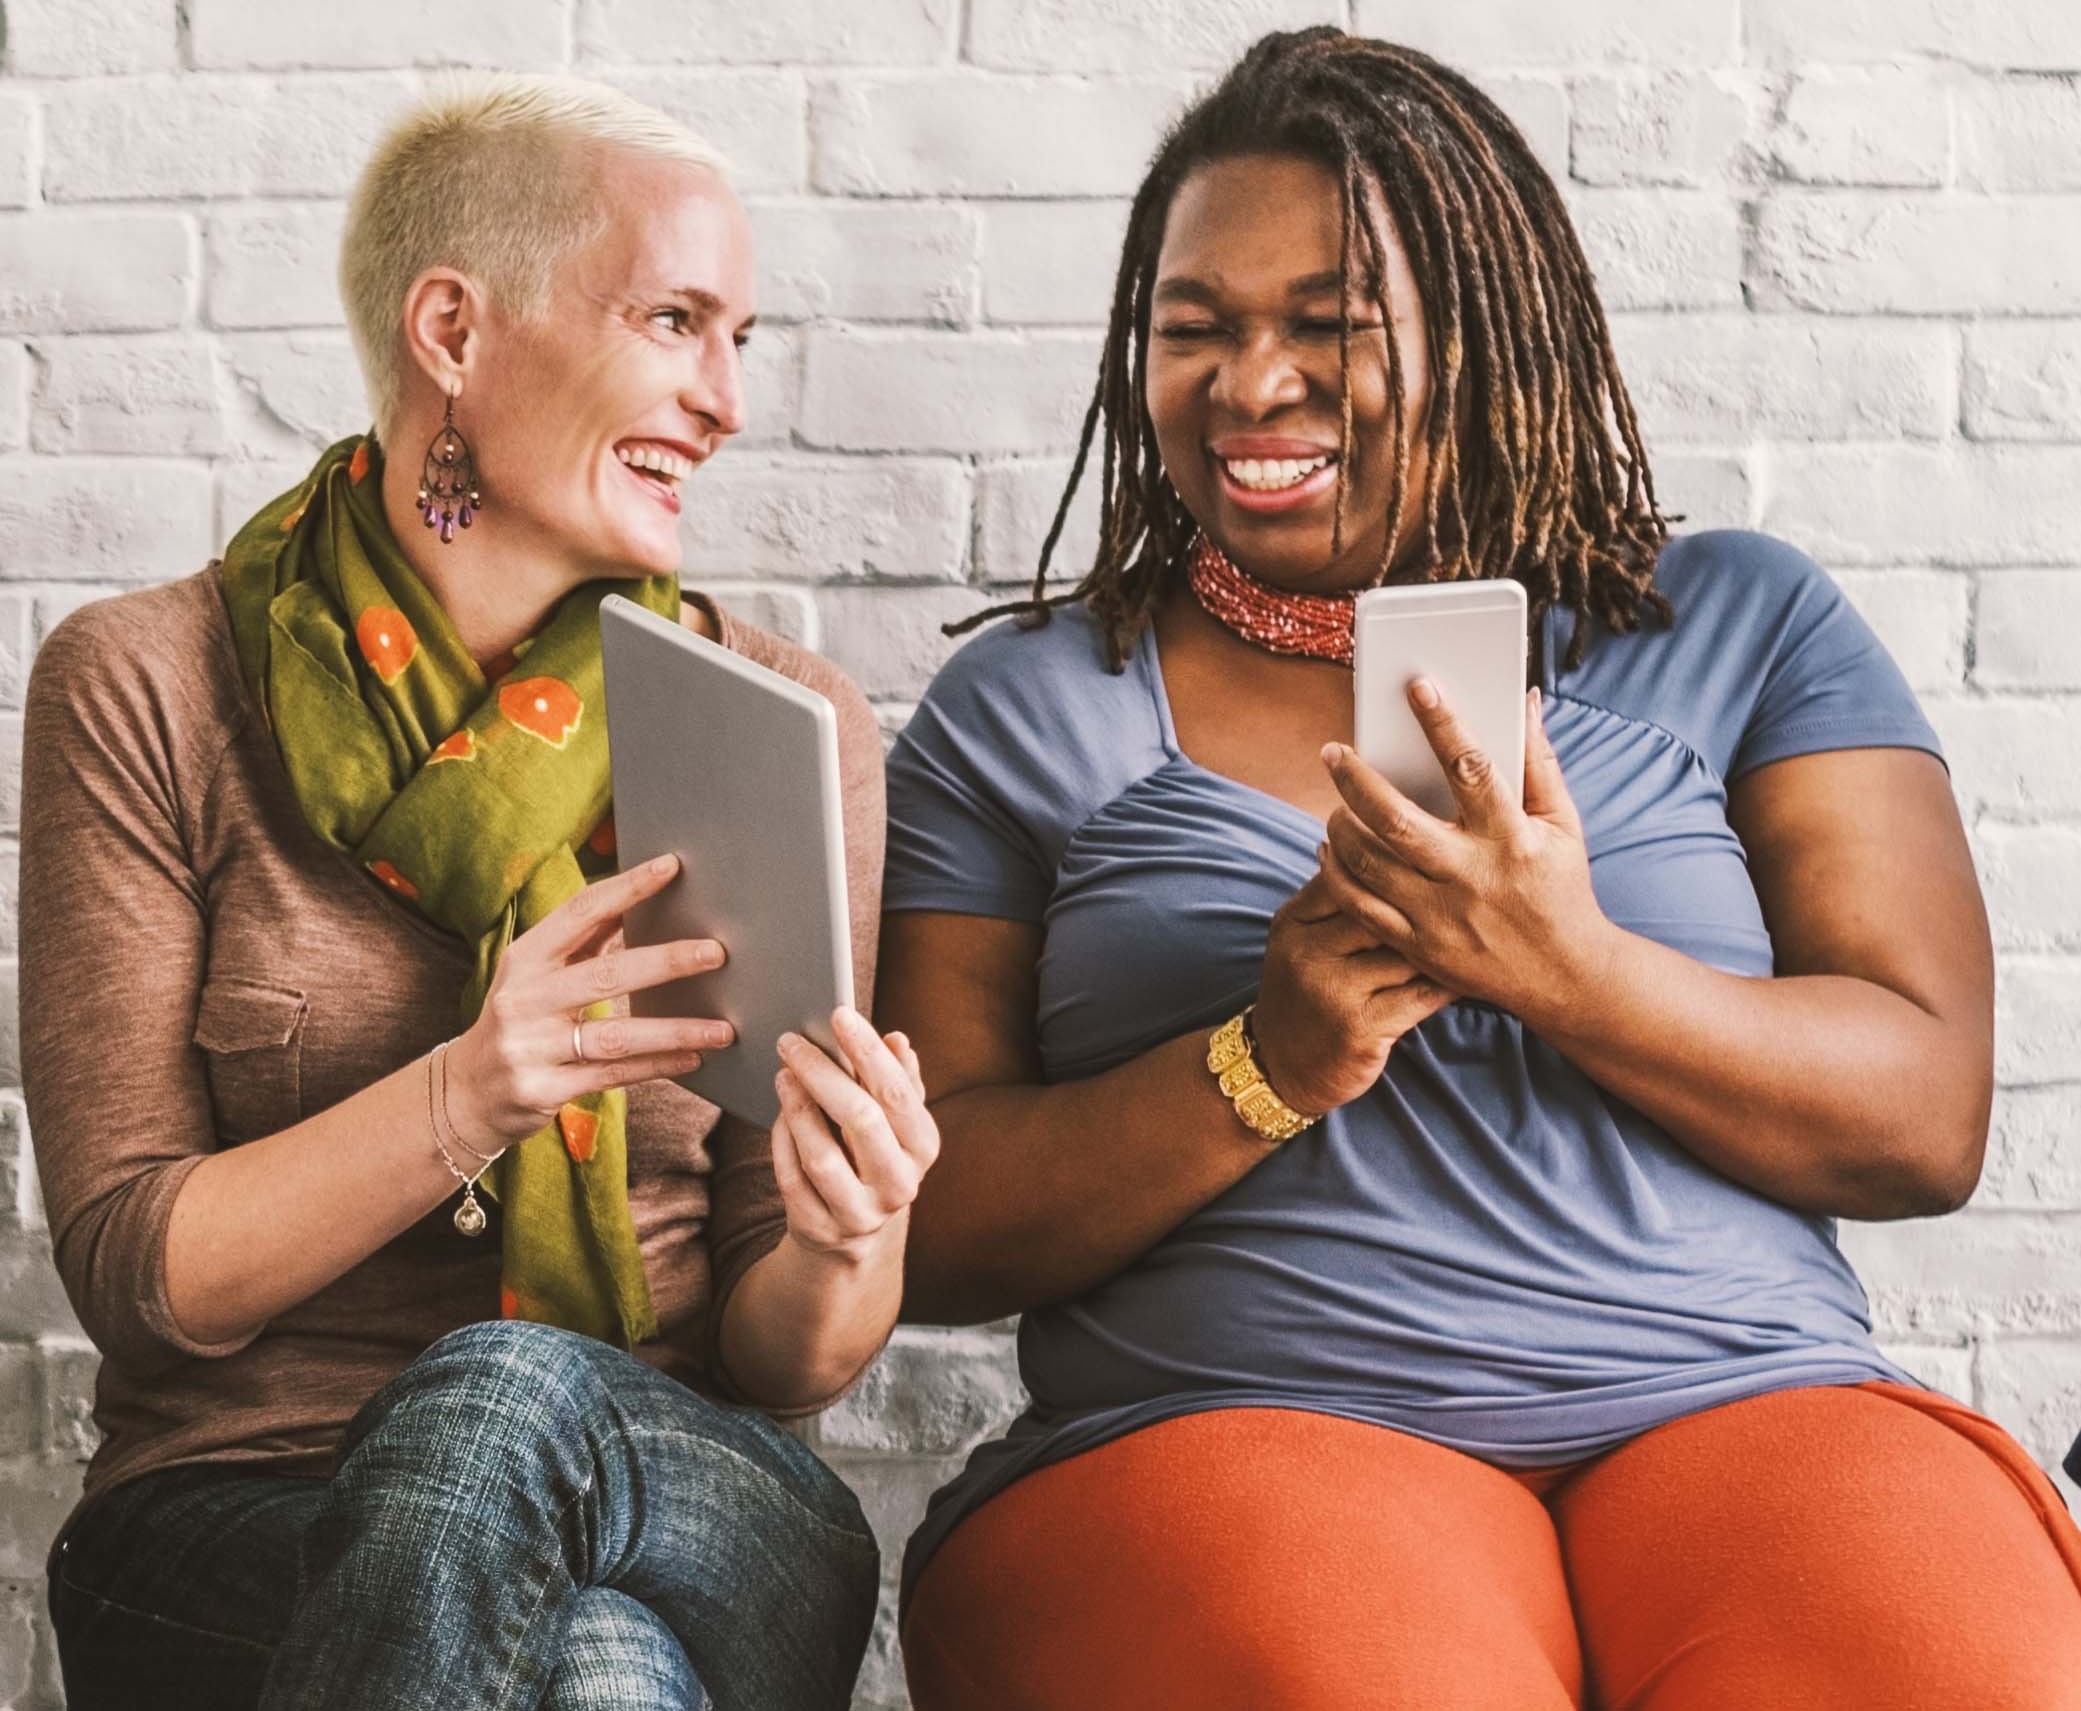 Stock photo of two women smile while showing each other their screens on handheld electronic devices